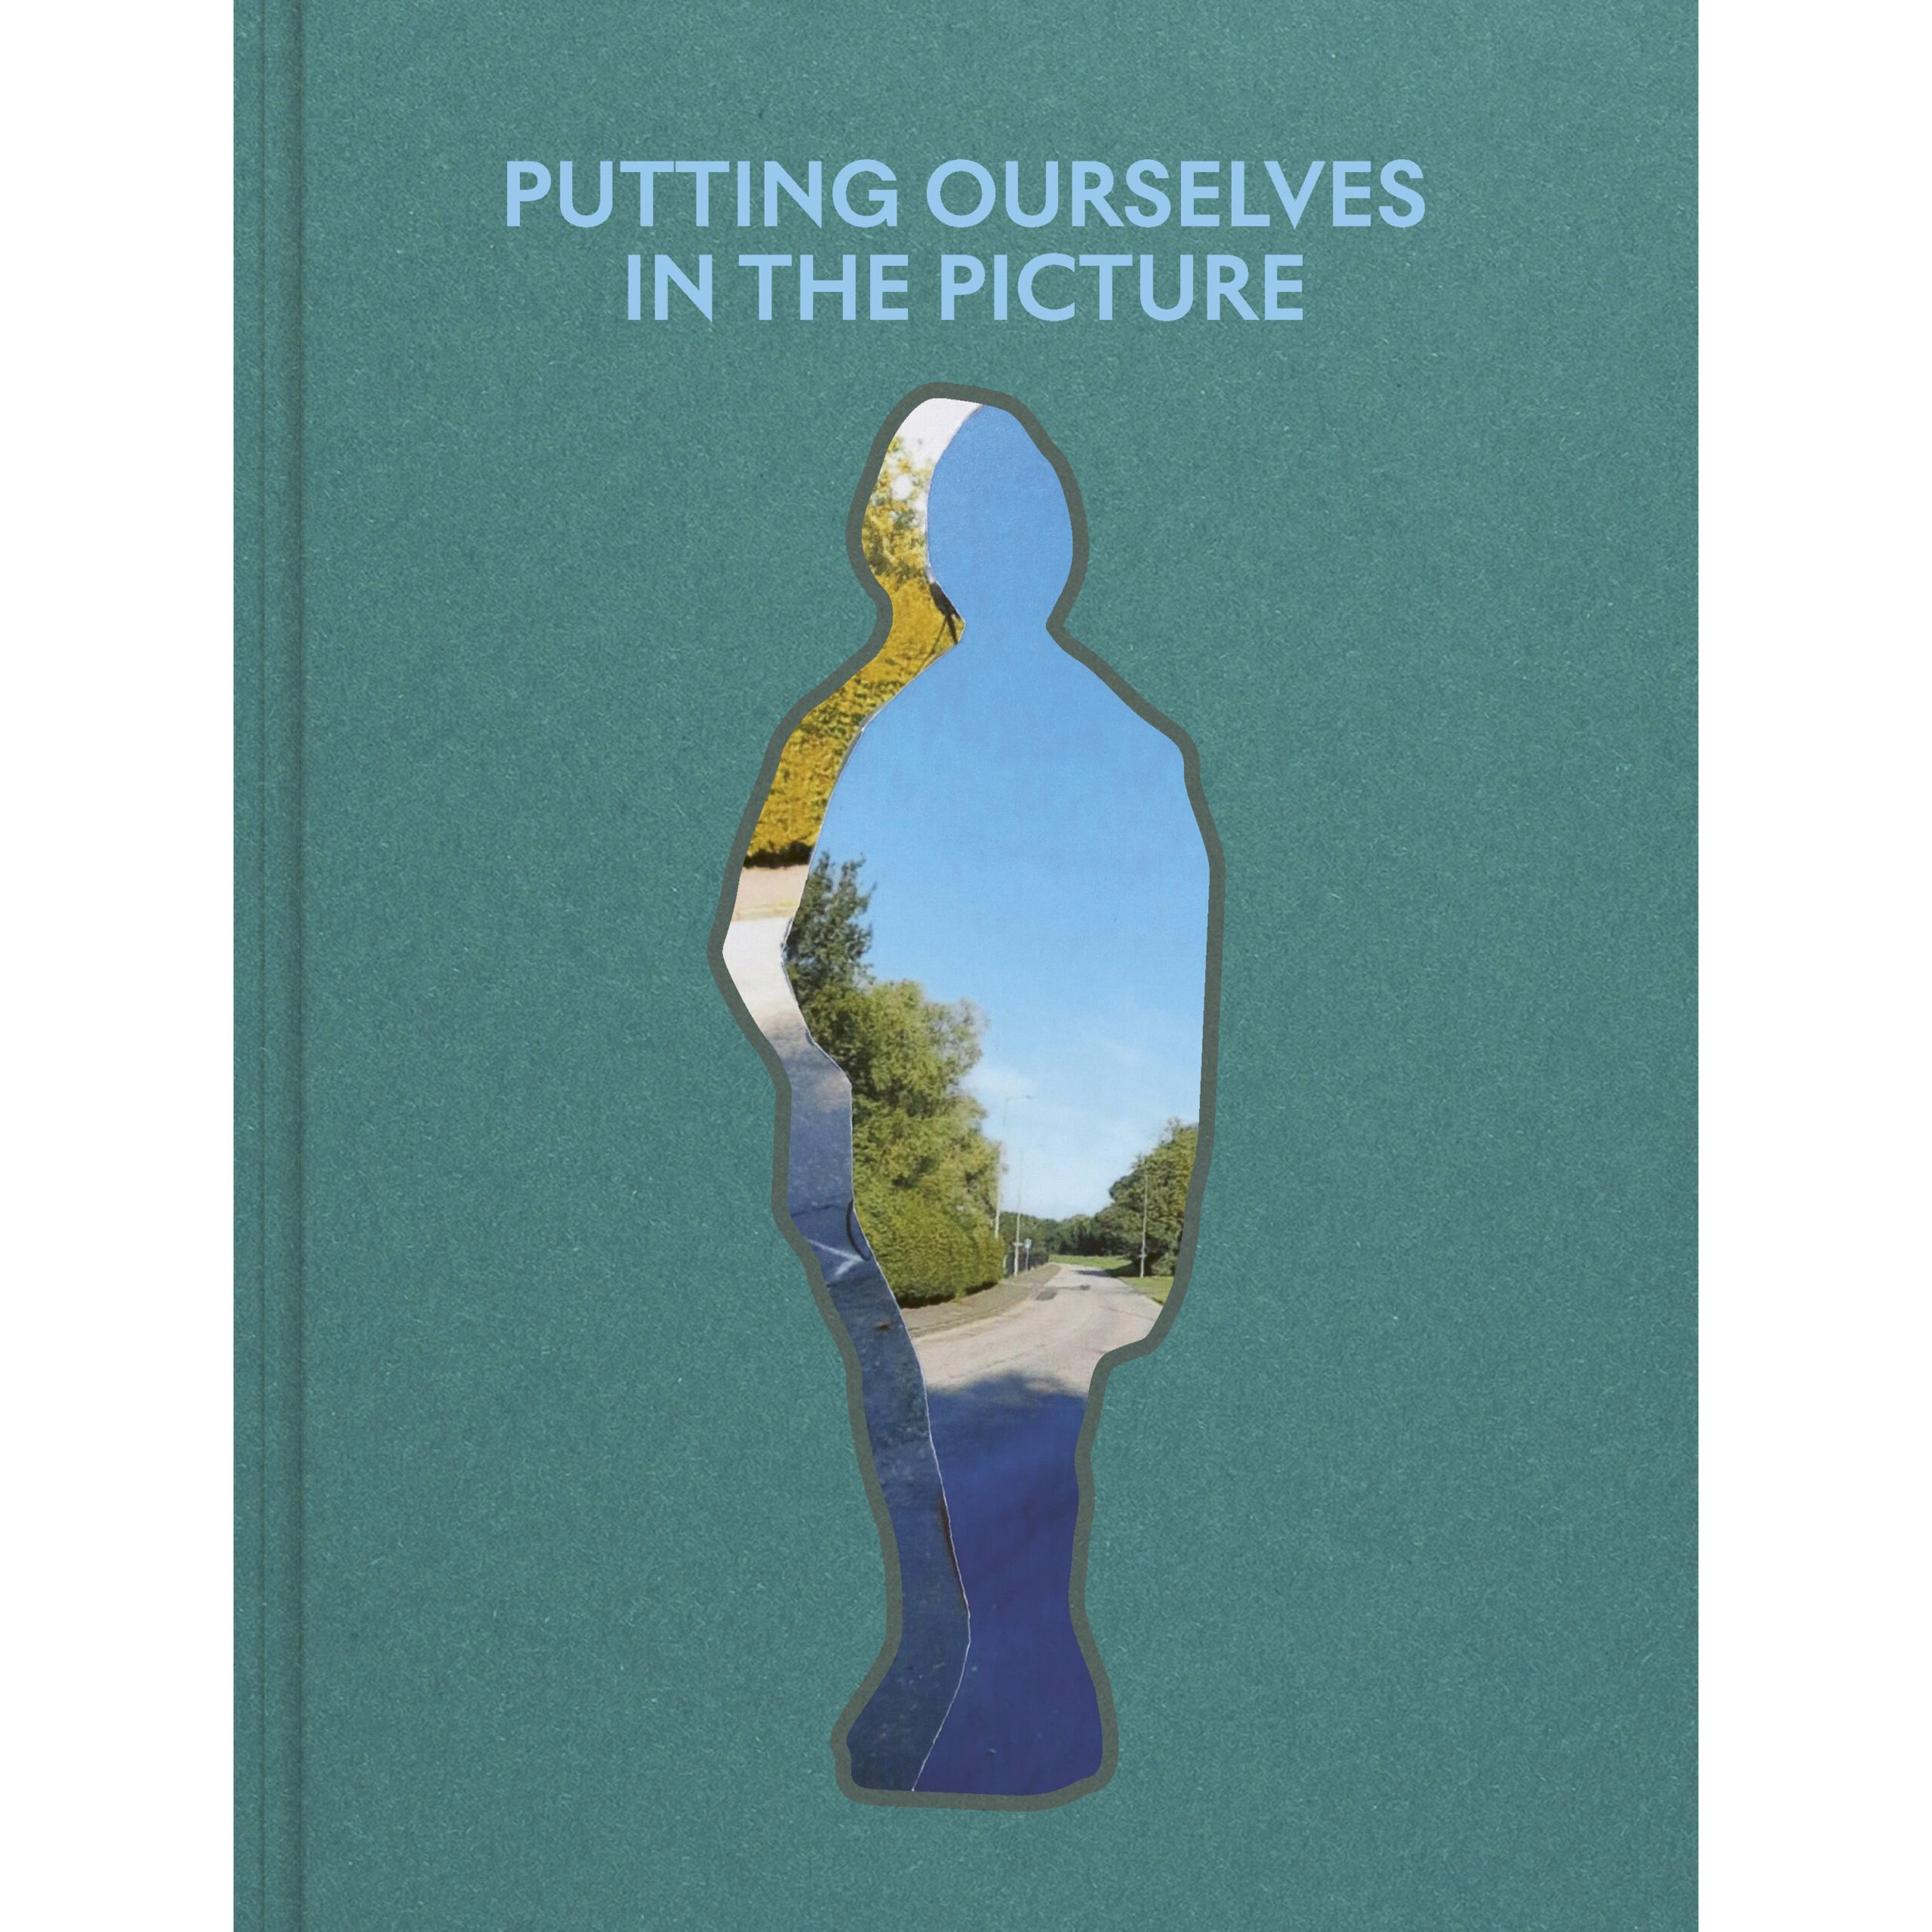 Putting-Ourselves-in-the-Picture-Cover-final-copy-scaled.jpeg